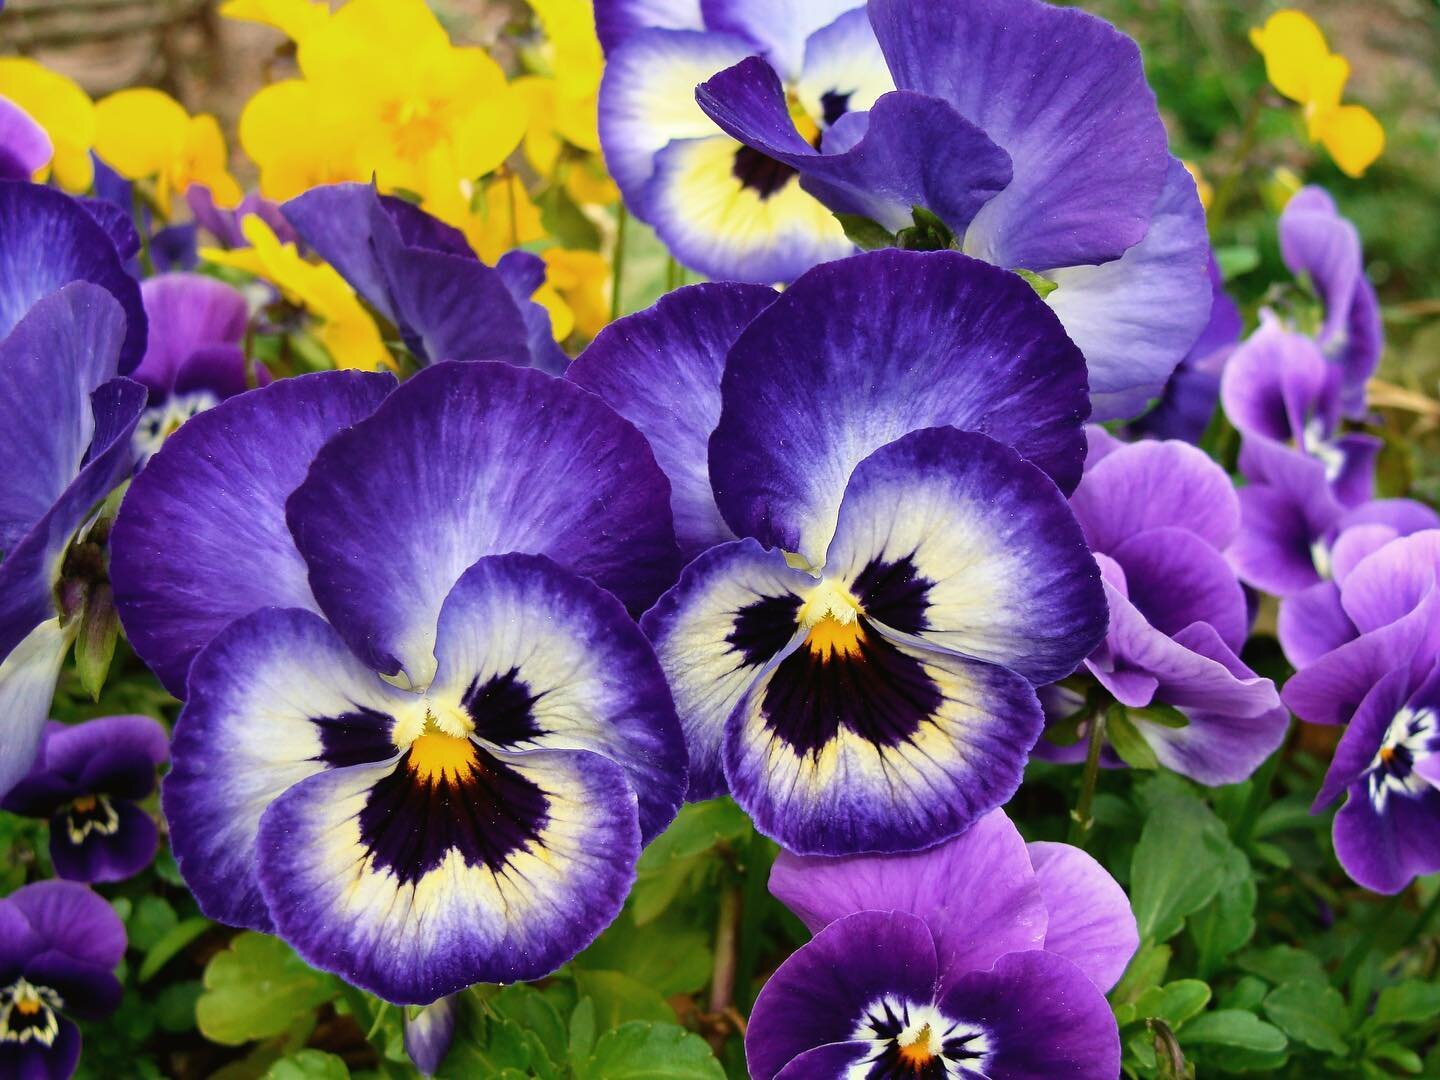 Expect to see a lot more pansies around in the coming months, such a beautiful choice for winter bedding.
-
-
-
-
-

#wow #garden #summer #londongarden #plants #trees #landscaping #gardening #gardenservices #colourful #vibrant #happy #nature #haven #